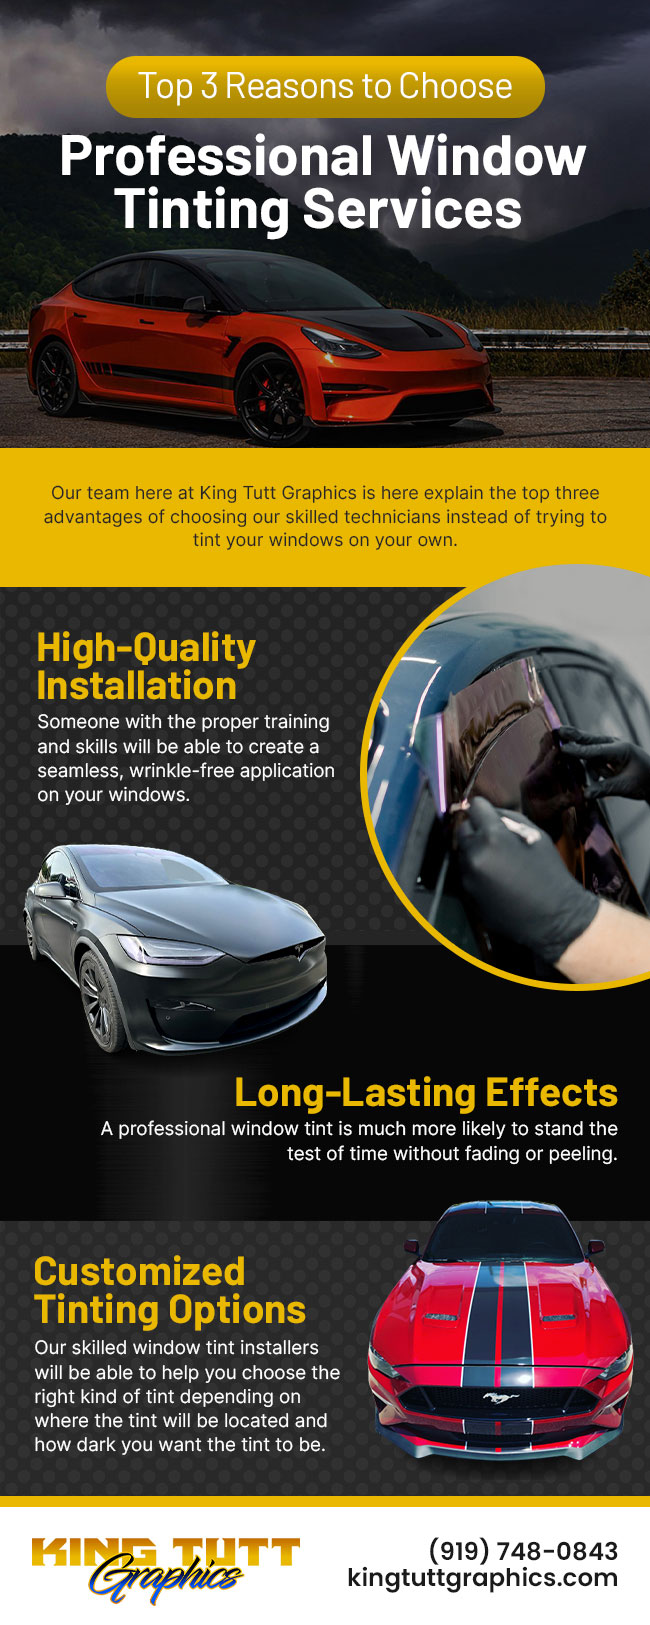 Top 3 Reasons to Choose Professional Window Tinting Services Over DIY Solutions